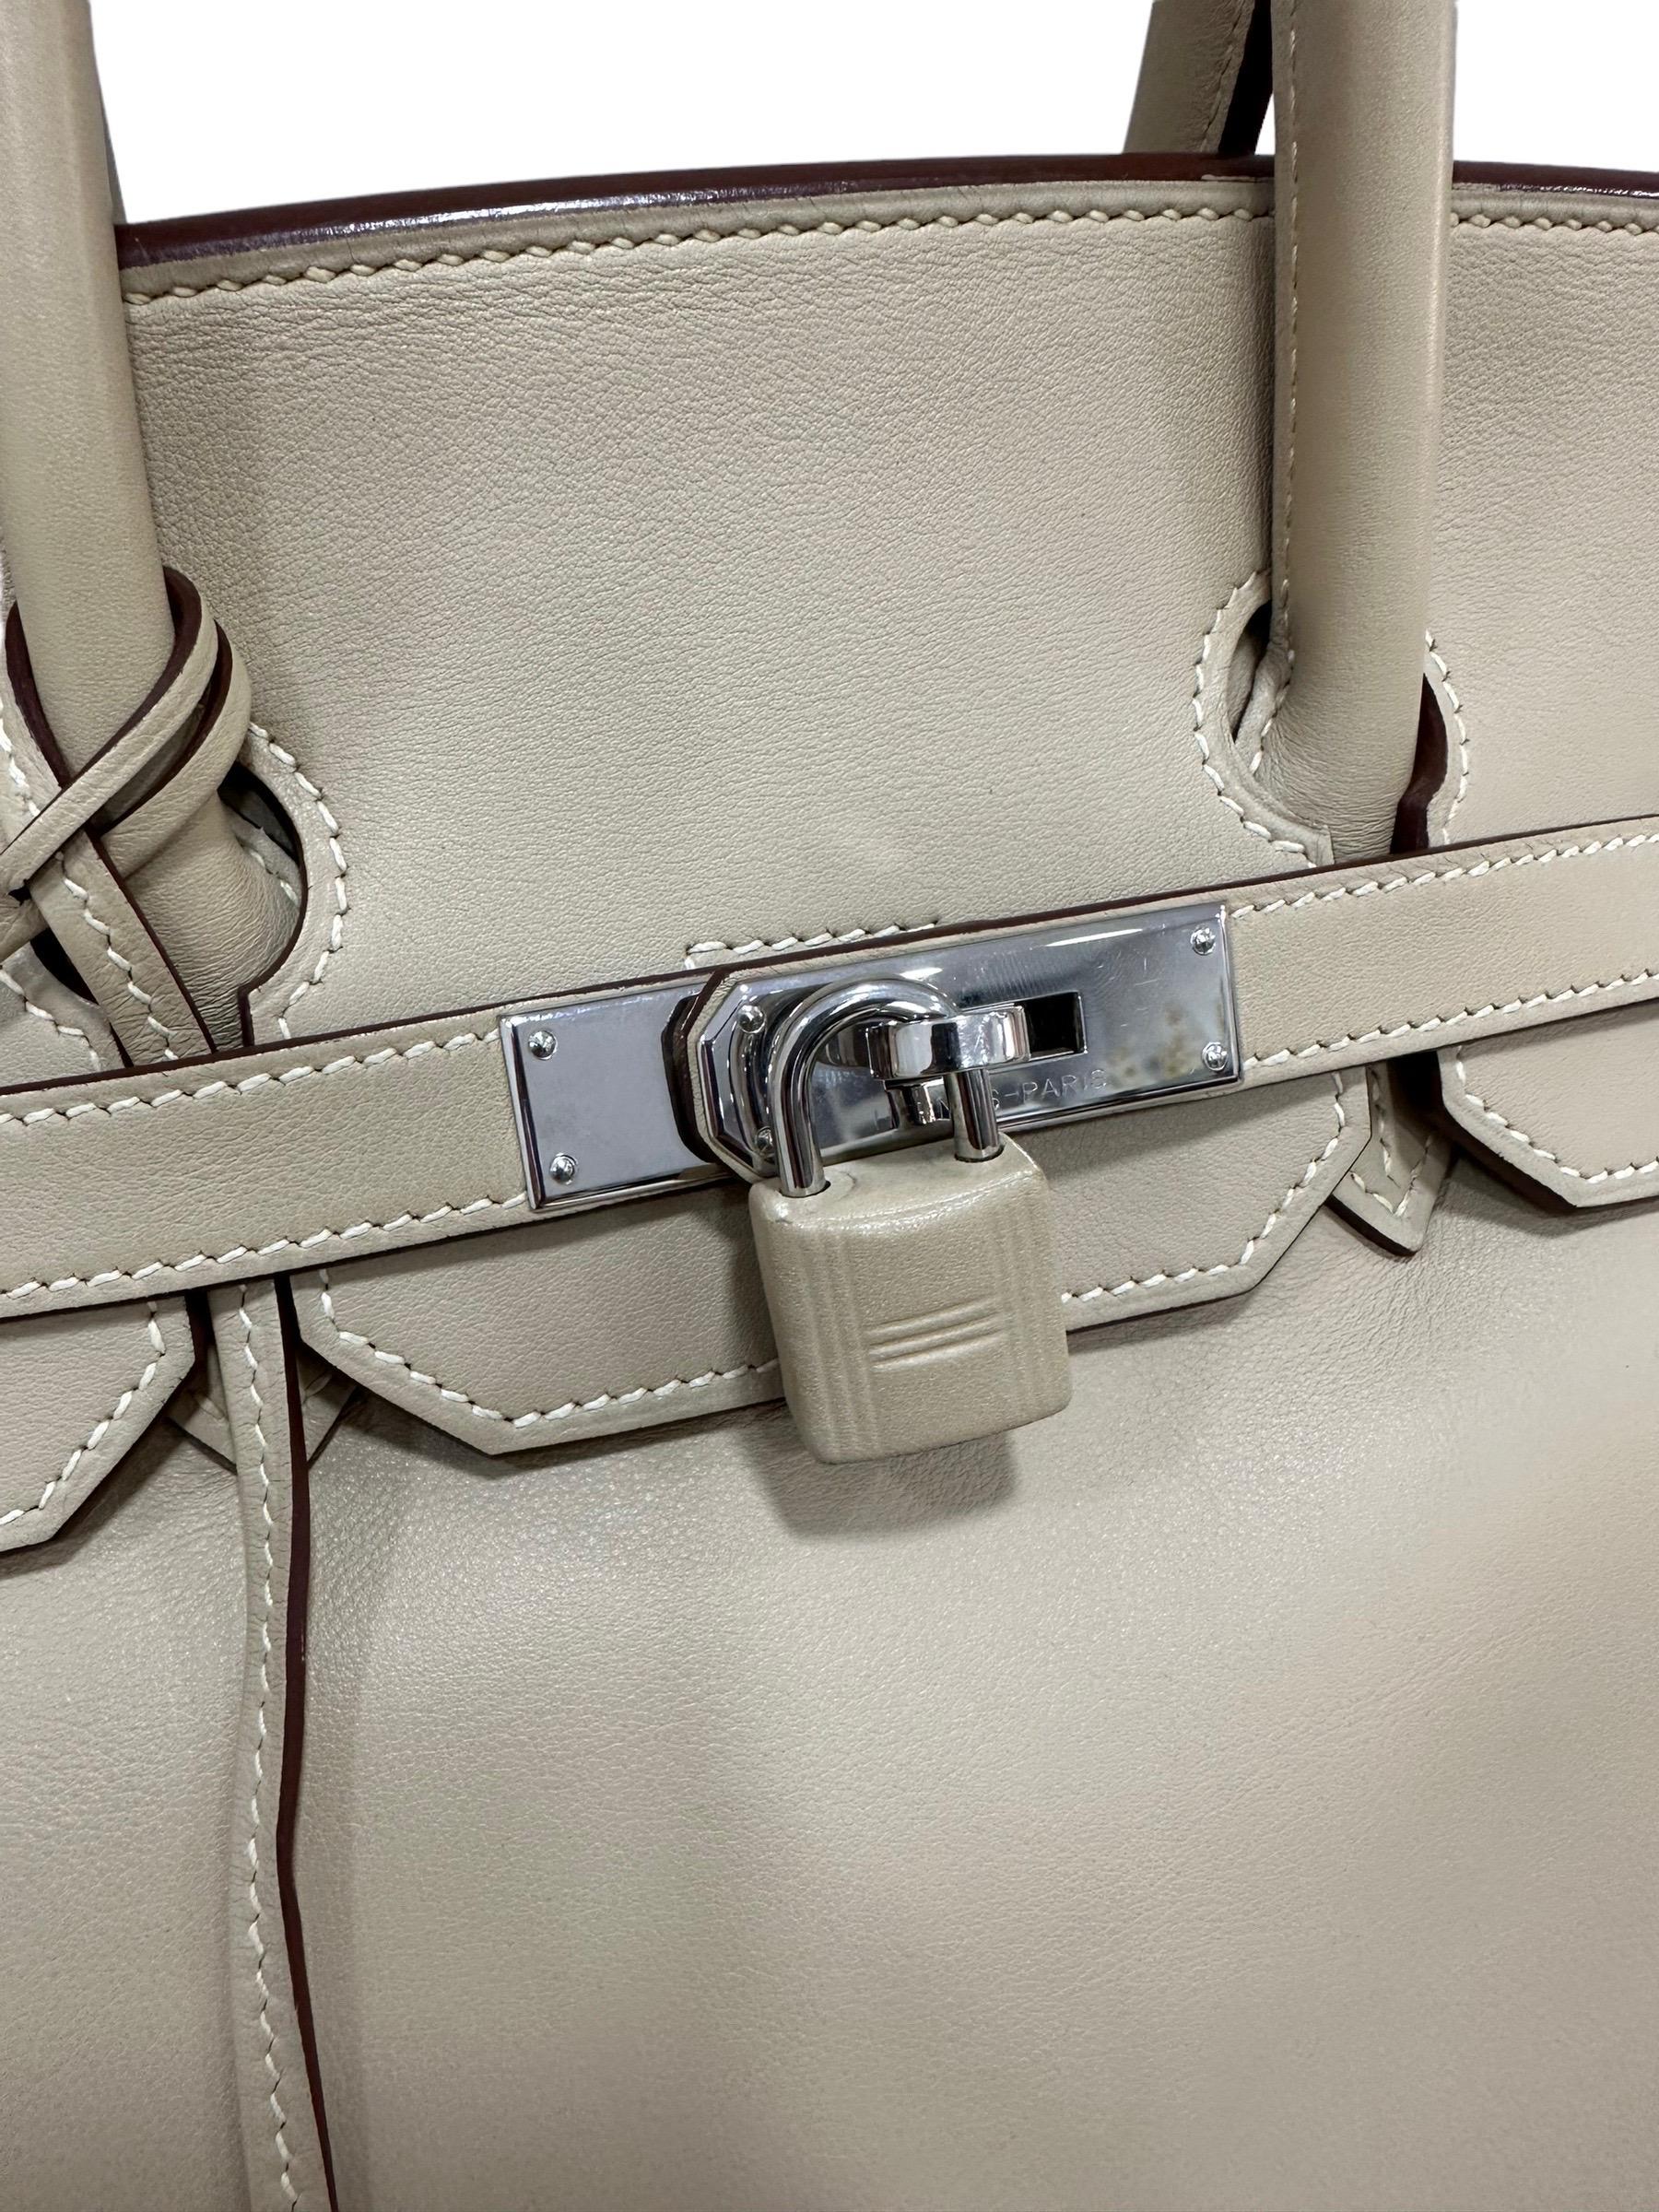 Iconic Hermès bag, Birkin model size 35, made in Trench-colored Hevercalf leather with silver hardware. The bag has a front flap equipped with a twist lock with two side bands. Equipped with a double rigid leather handle to wear it comfortably by